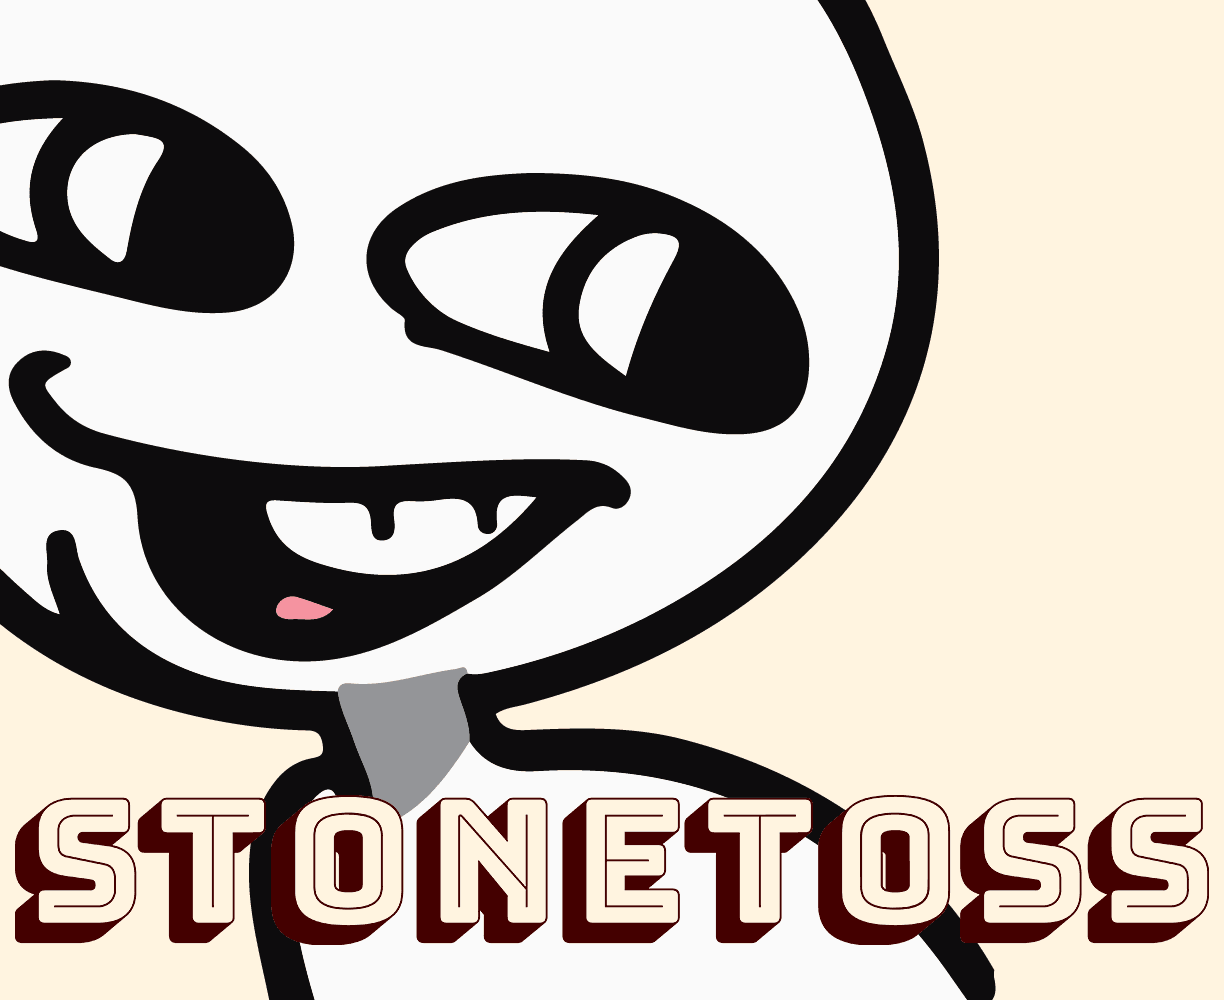 The cover art for the episode Das Kapital from the comics series Stonetoss, which is number 276 in the series